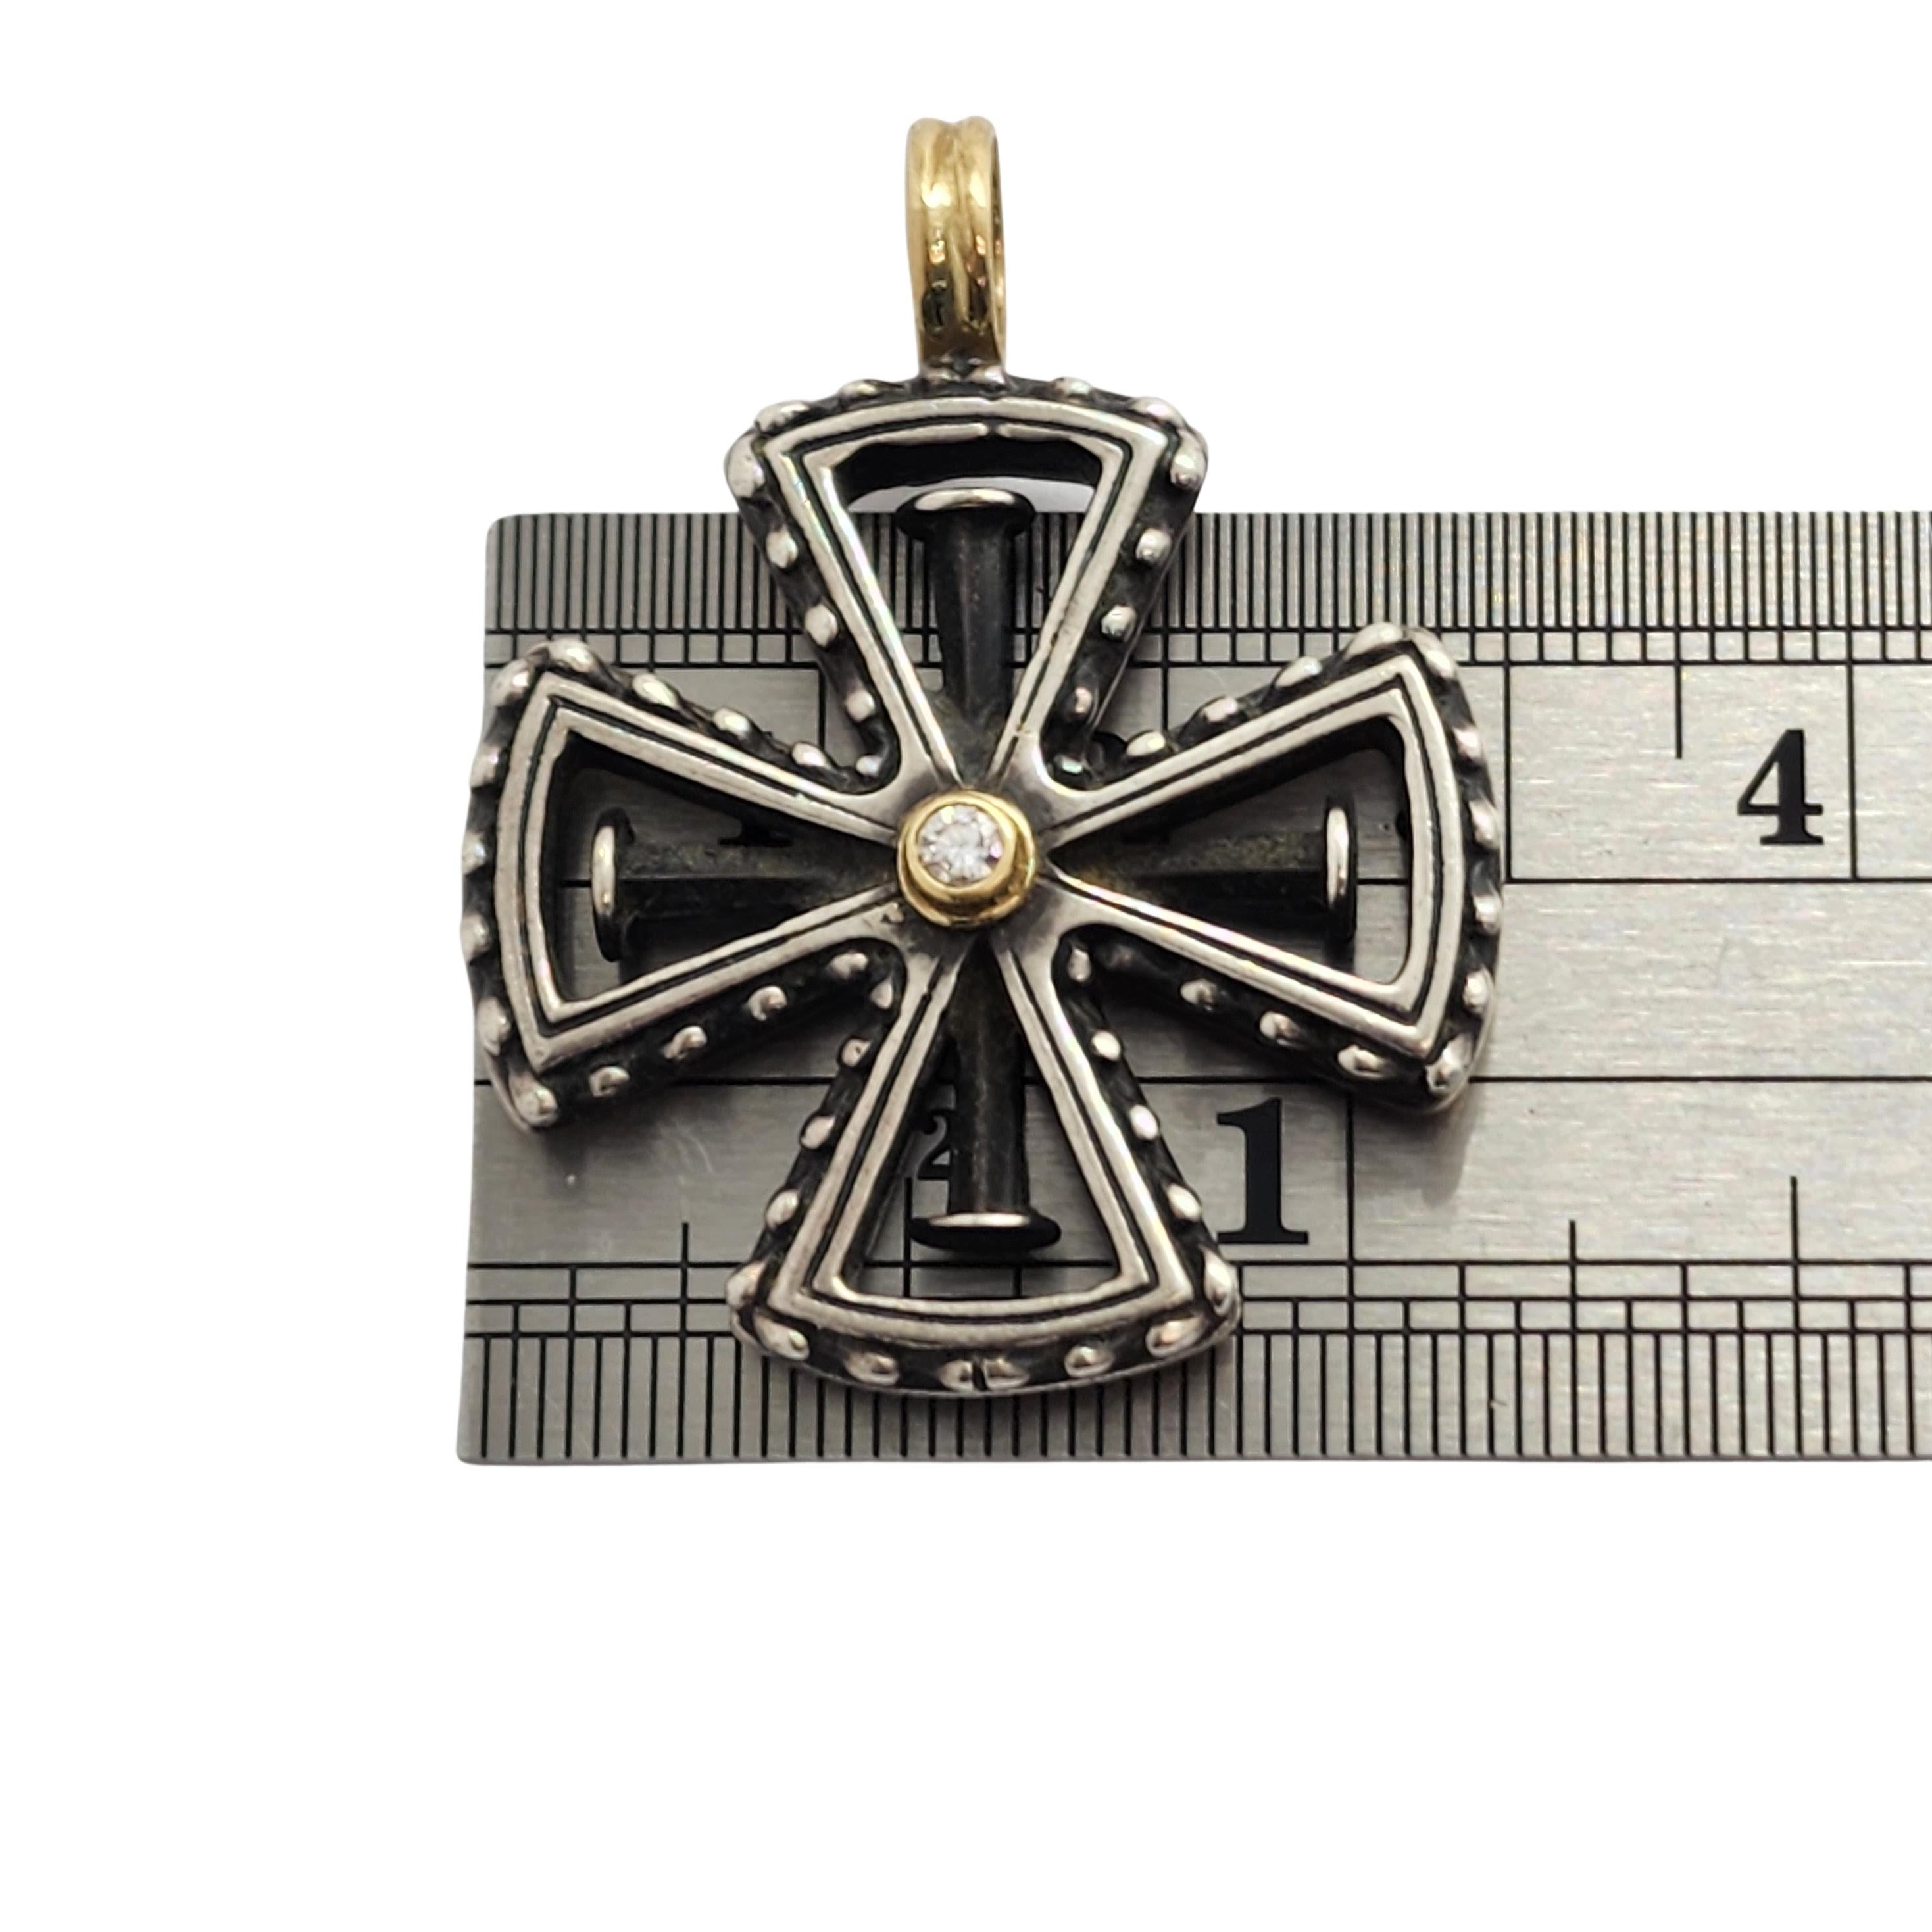 Sterling silver and 18K yellow gold cross with diamond by Konstantino.

A sterling silver in a knights Templar cross design with 18K yellow gold accents and a .07ct round diamond at the center in an 18K yellow gold bezel.

Measures approx 1 1/2